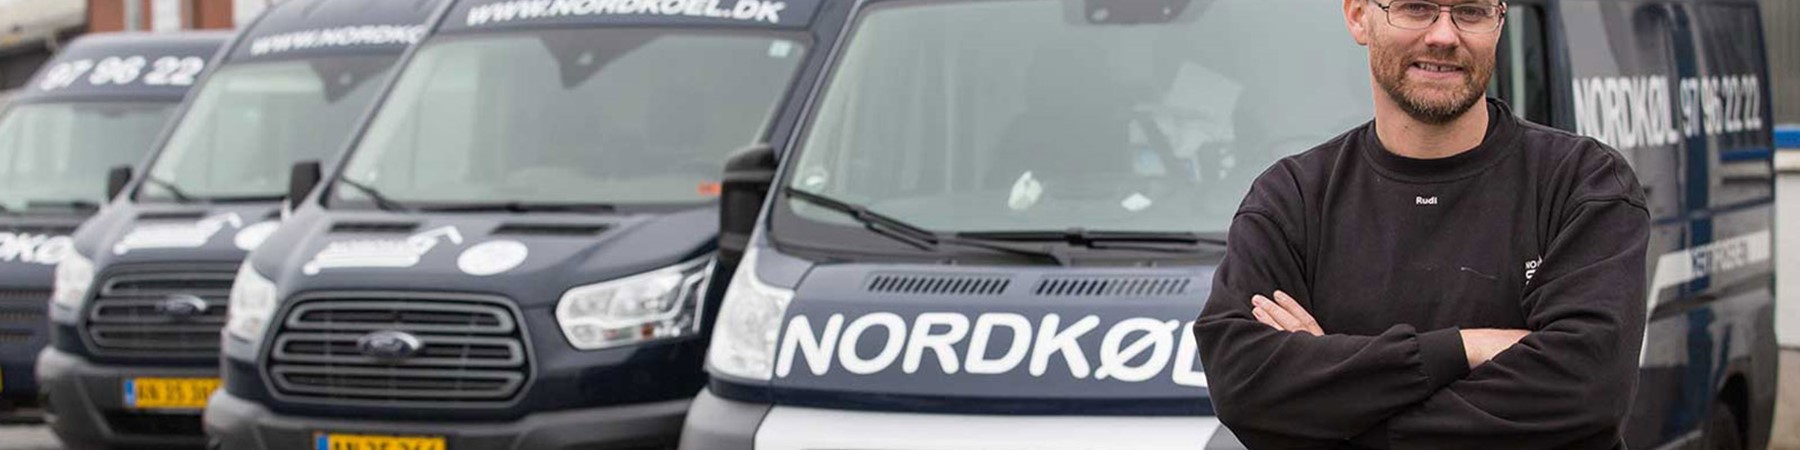 RSW Systems Nordkøl ApS